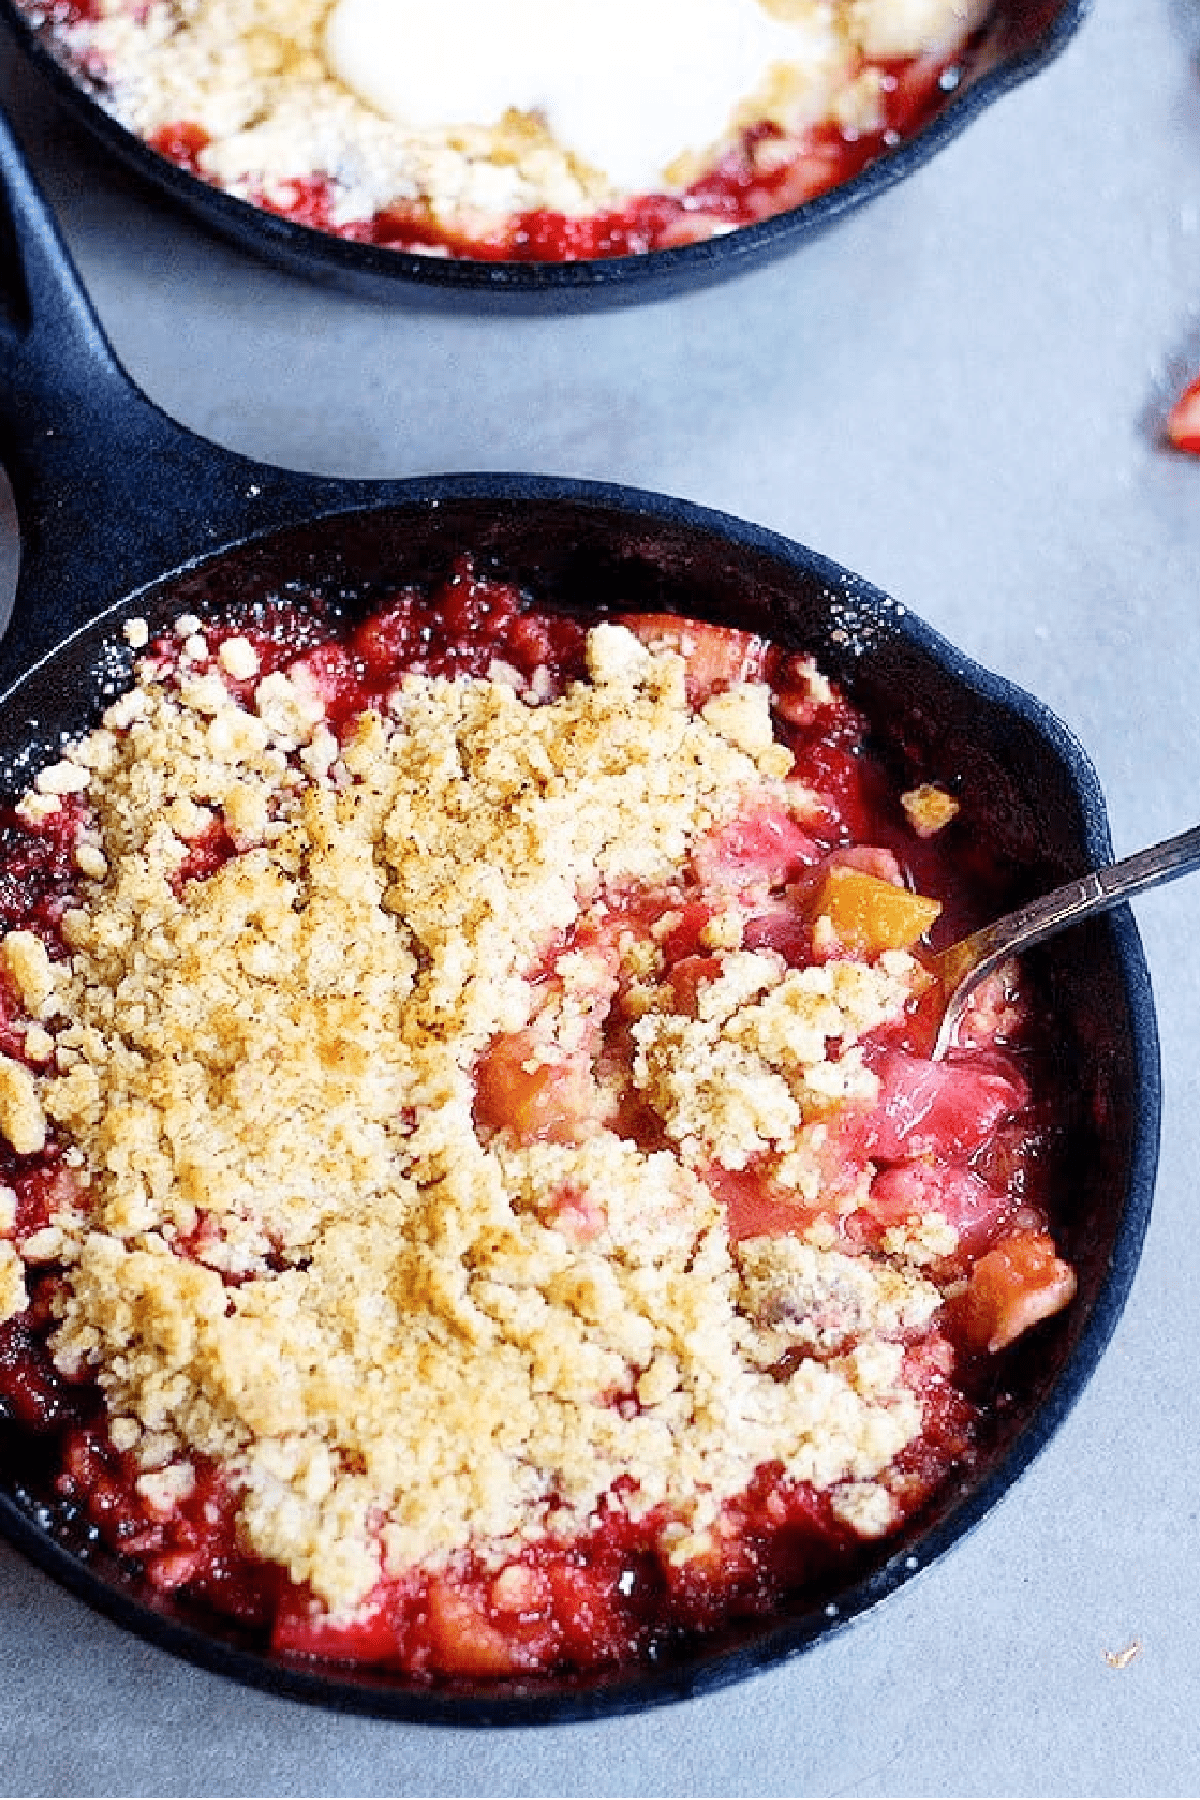 Strawberry Rhubarb Crumble is the ultimate spring dessert. Juicy strawberries and rhubarbs mixed with sugar and topped with a good crumble make this dessert delicious!
